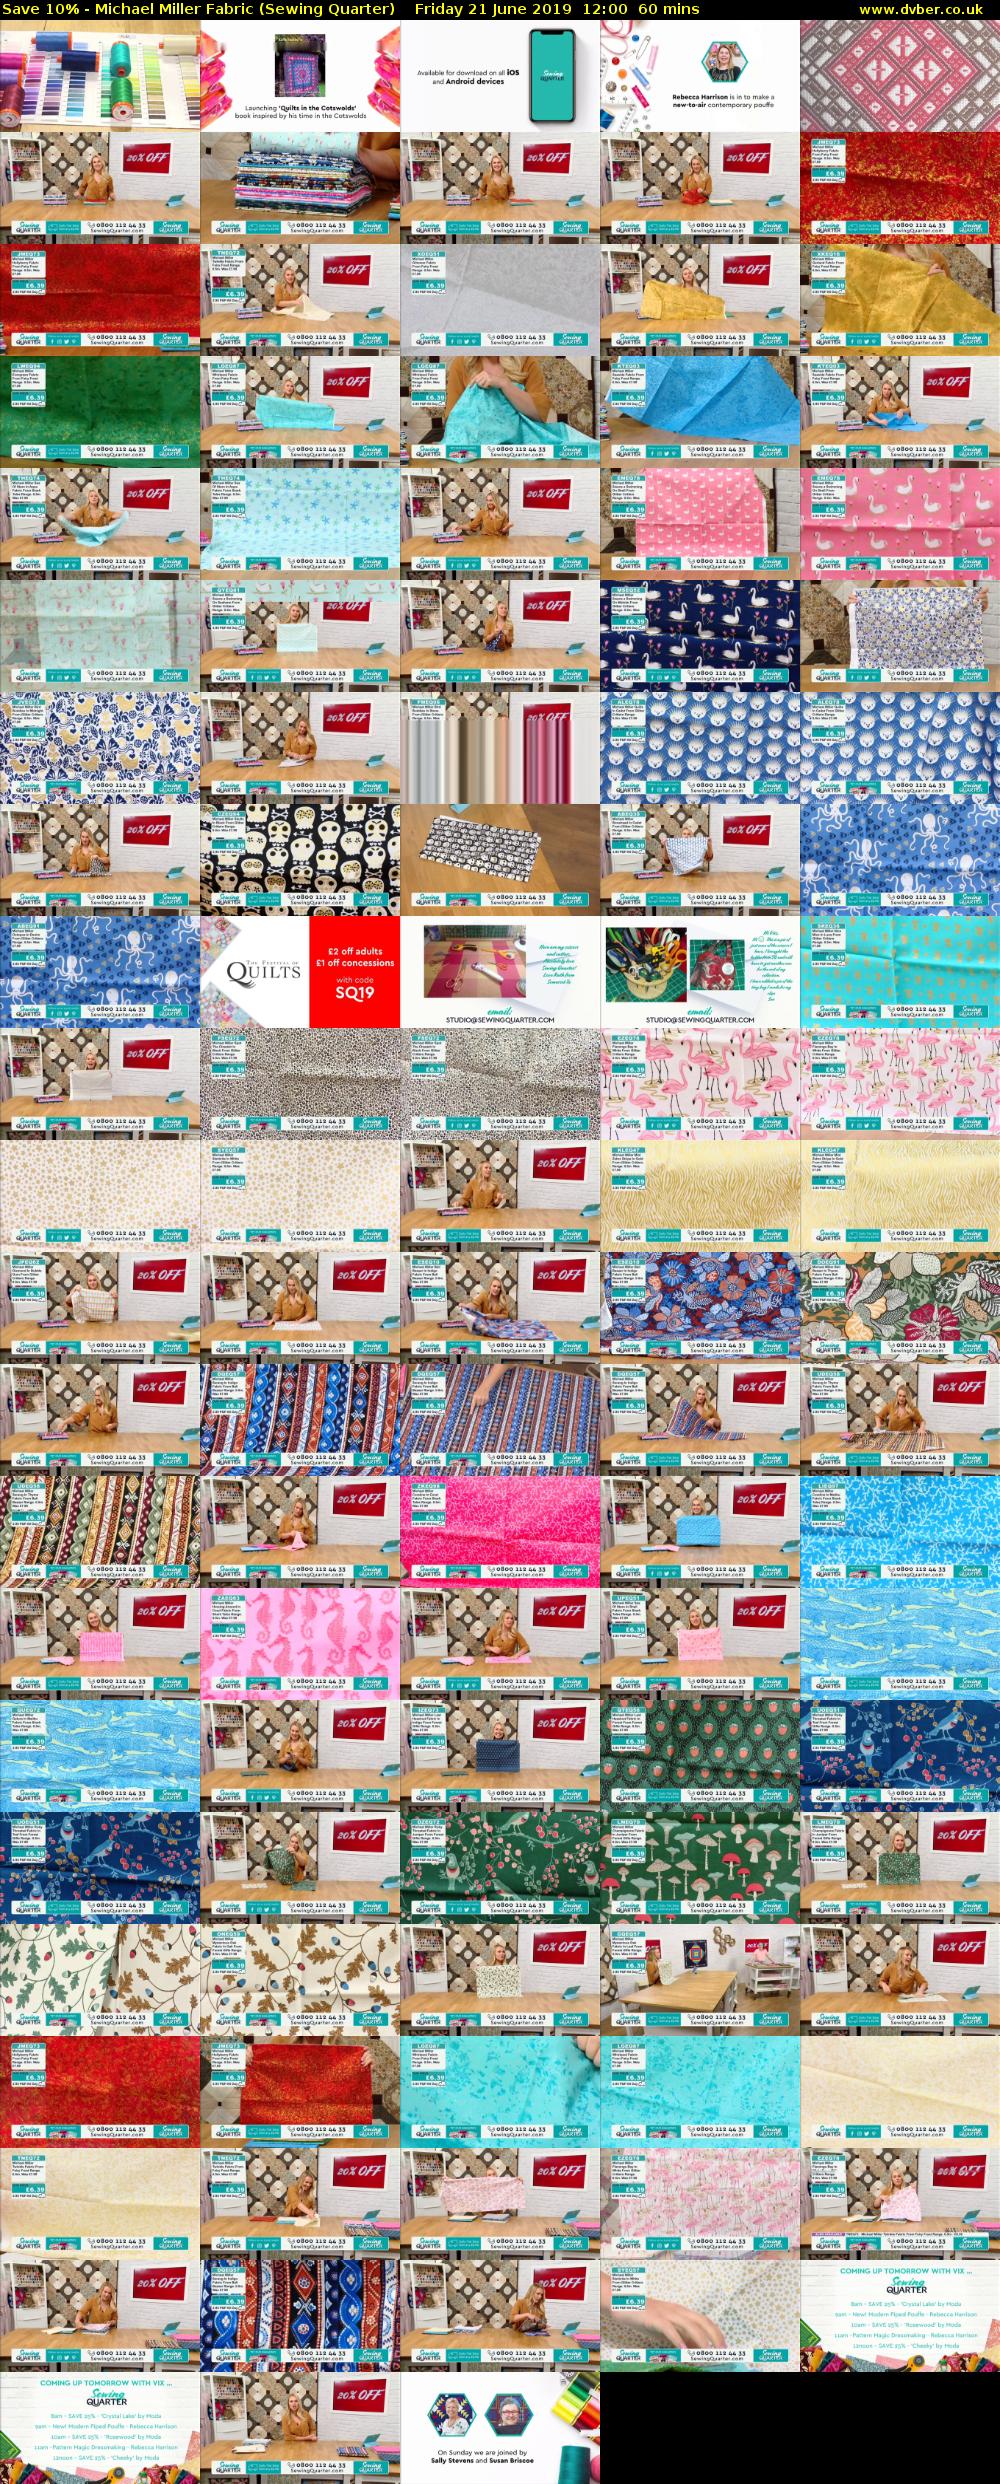 Save 10% - Michael Miller Fabric (Sewing Quarter) Friday 21 June 2019 12:00 - 13:00